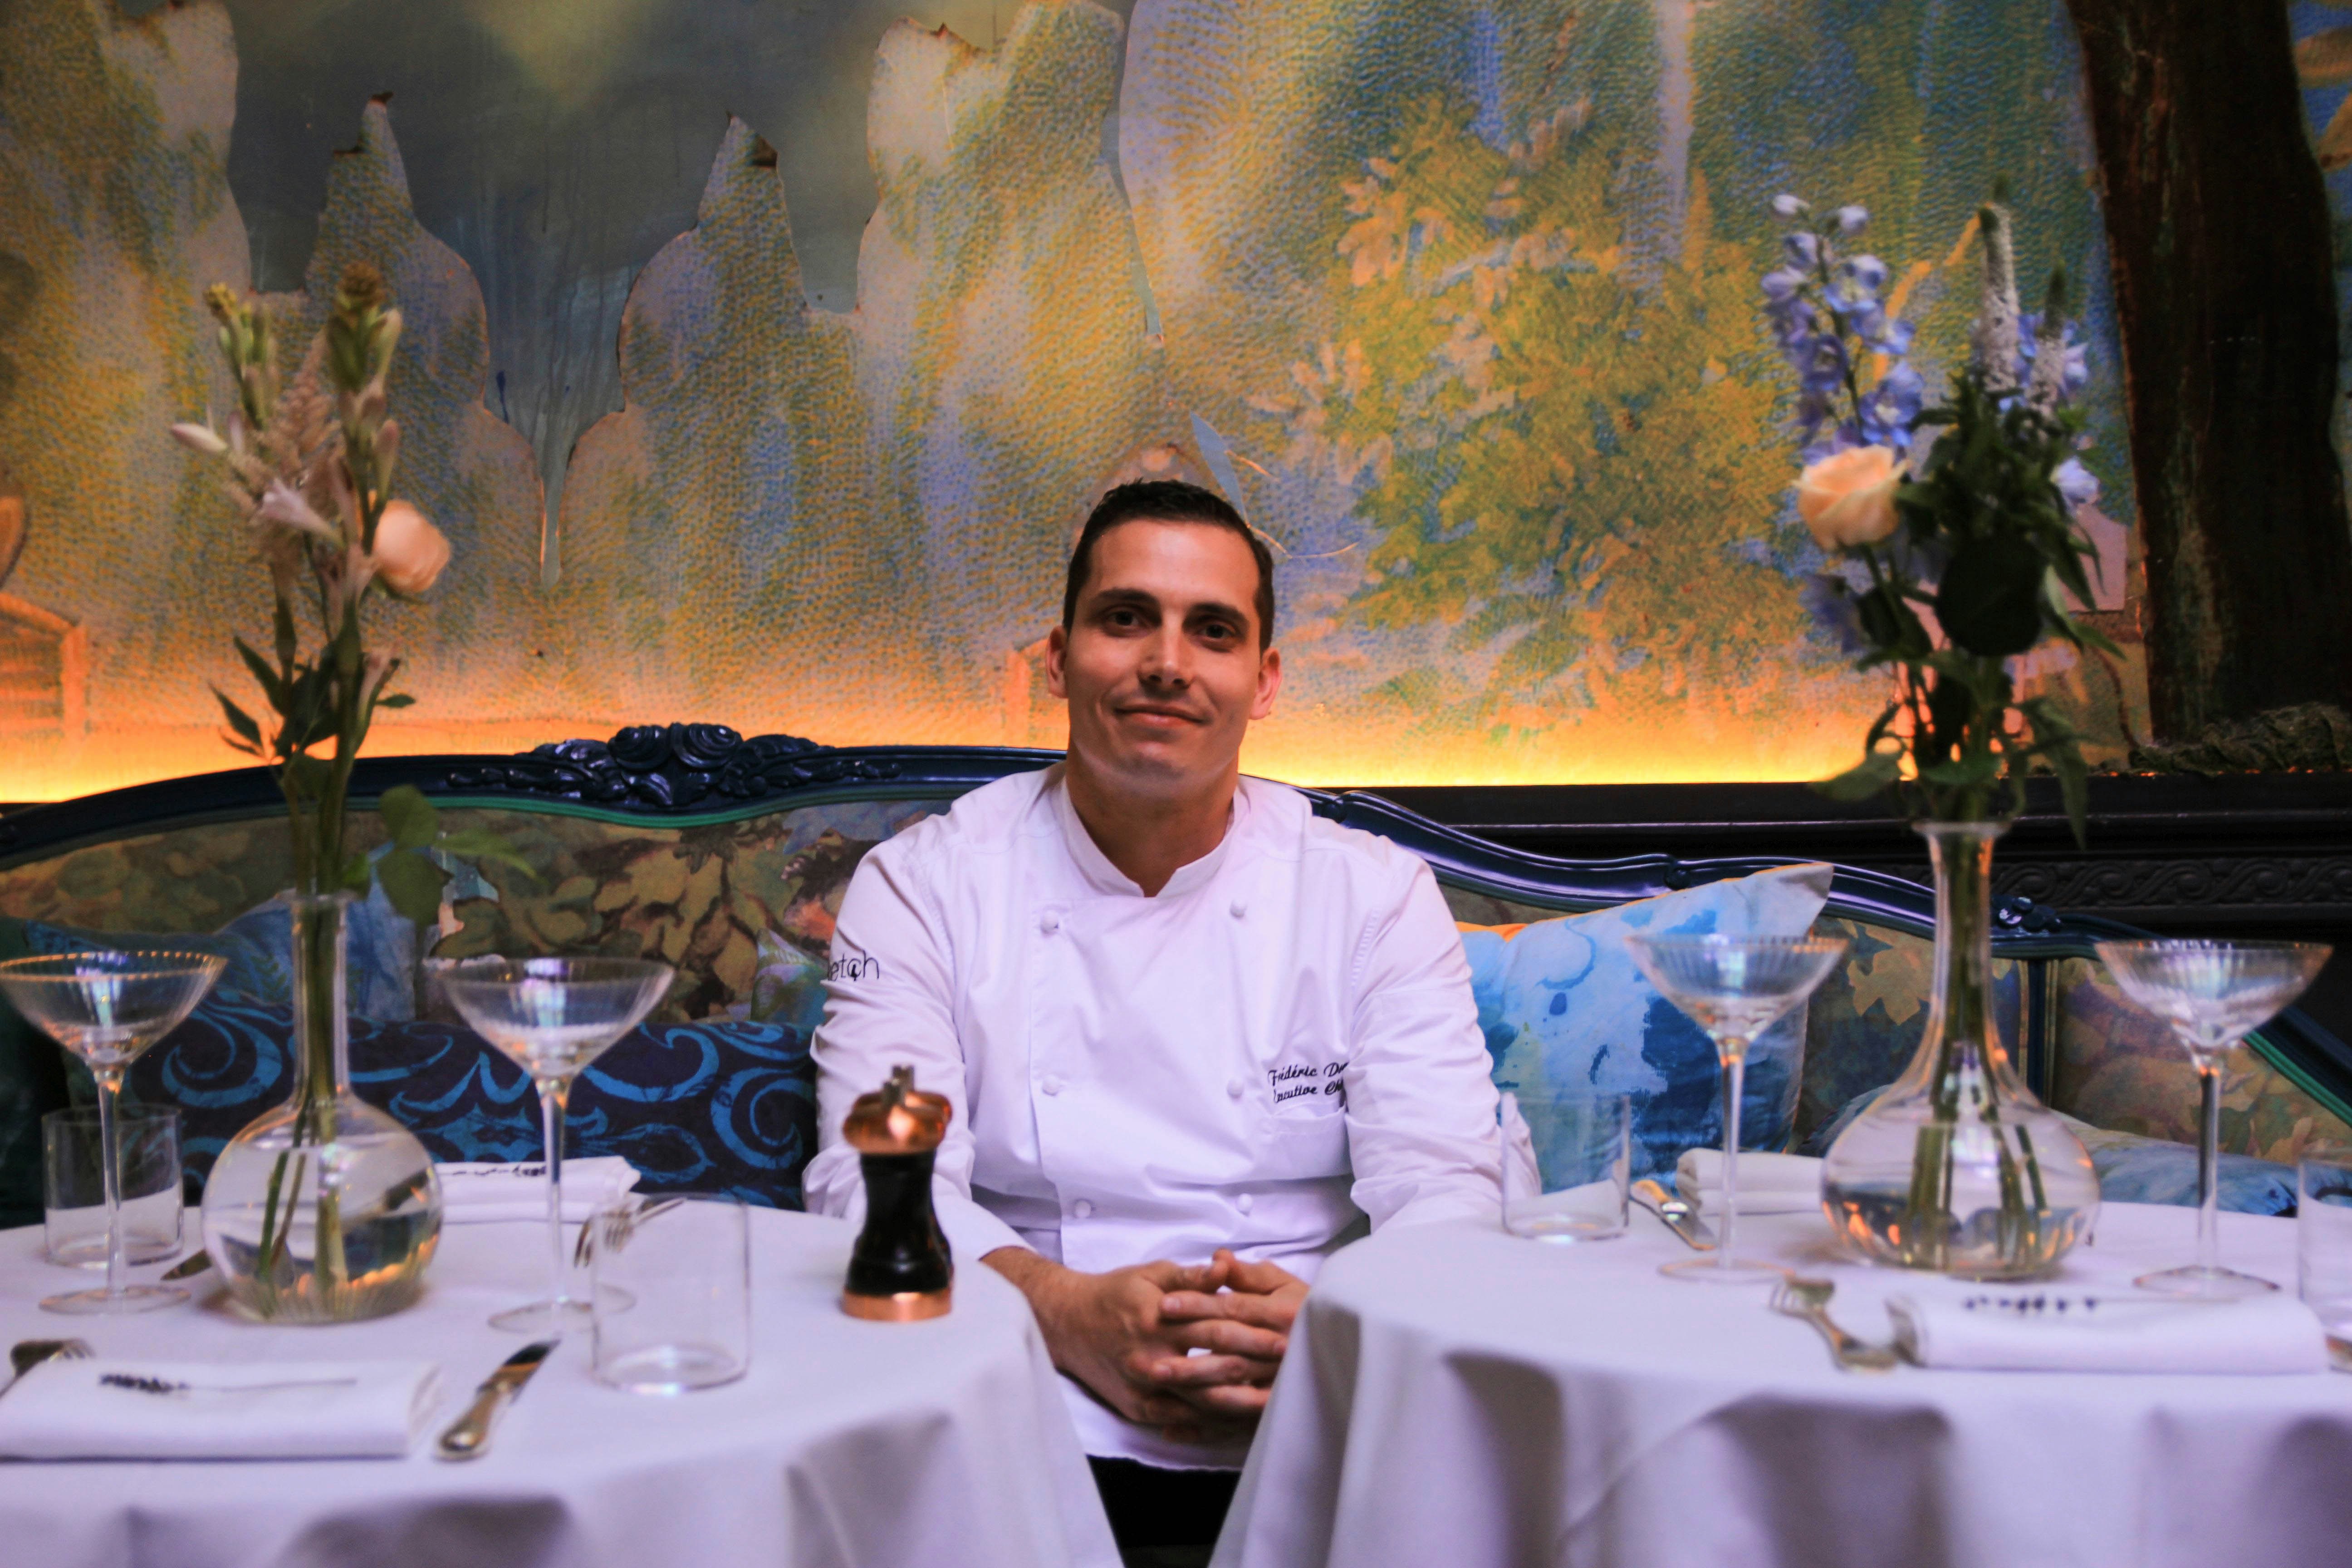 A chef in a white chef jacket sits between two round tables with white tablecloths, each set with a vase of flowers and wine glasses. The wall behind him is a painted mural in muted colours.